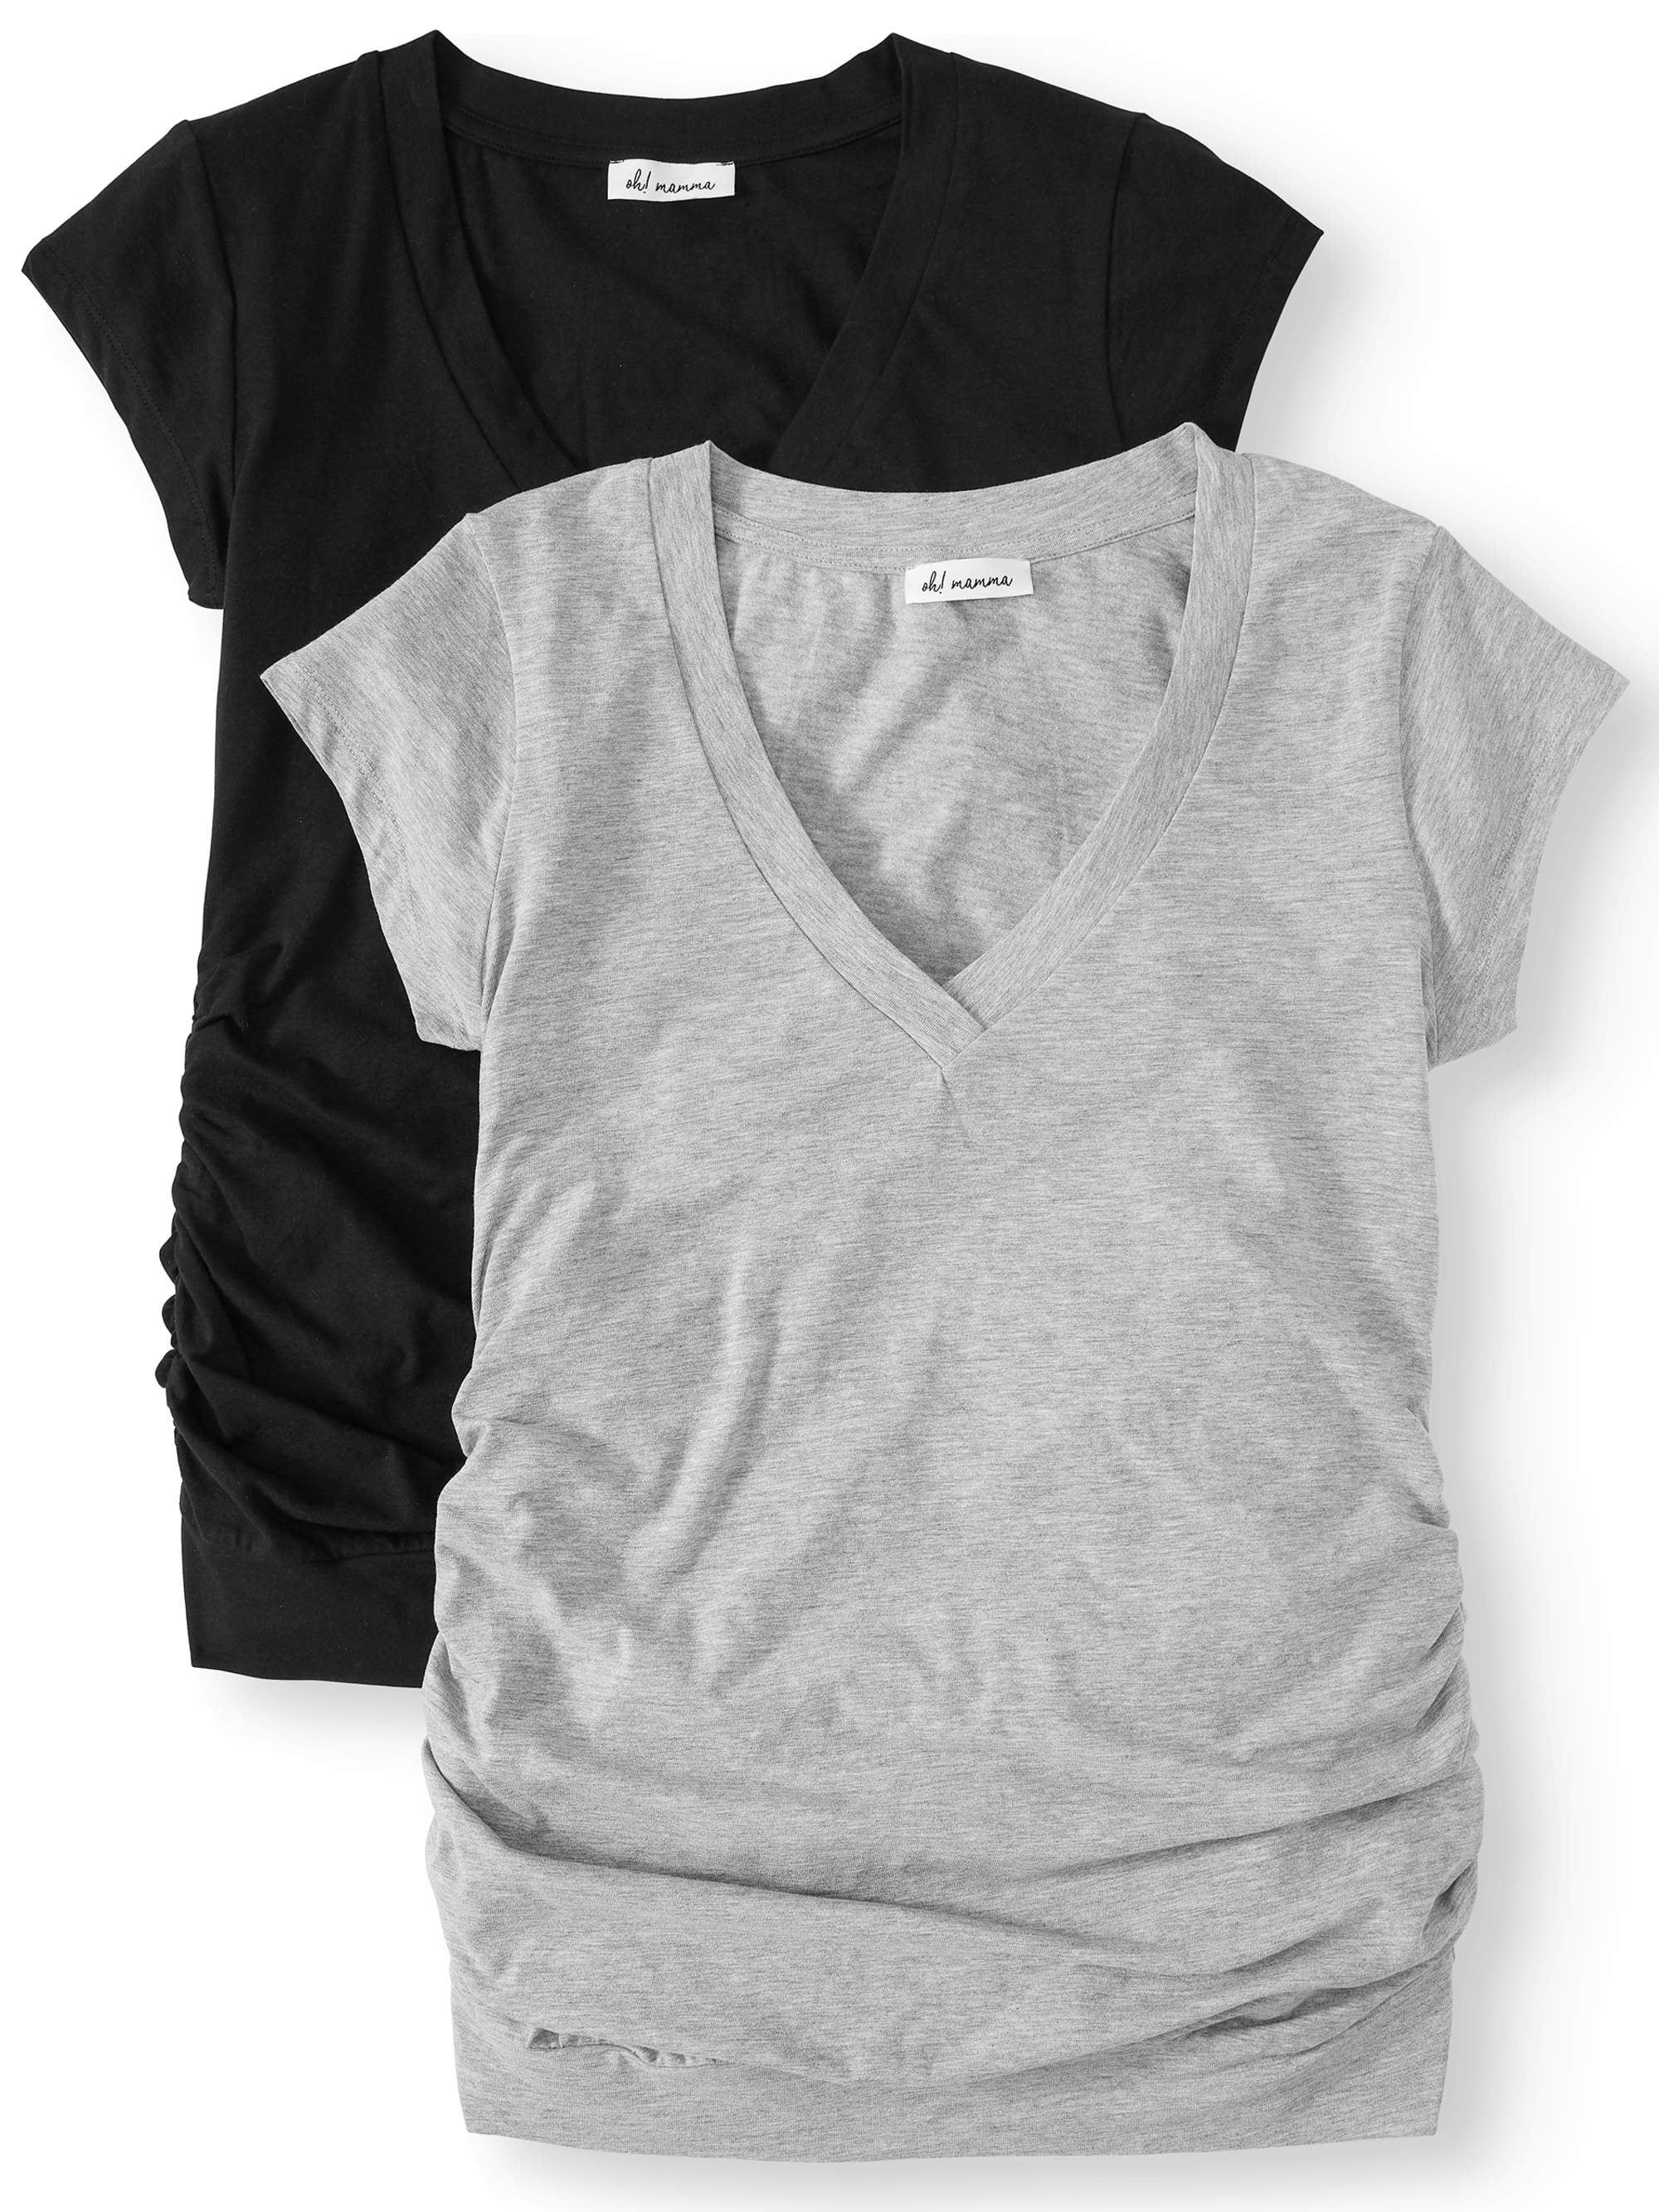 Oh! Mamma Maternity V-neck Tee 2 Pack - Available in Plus Sizes | Walmart (US)